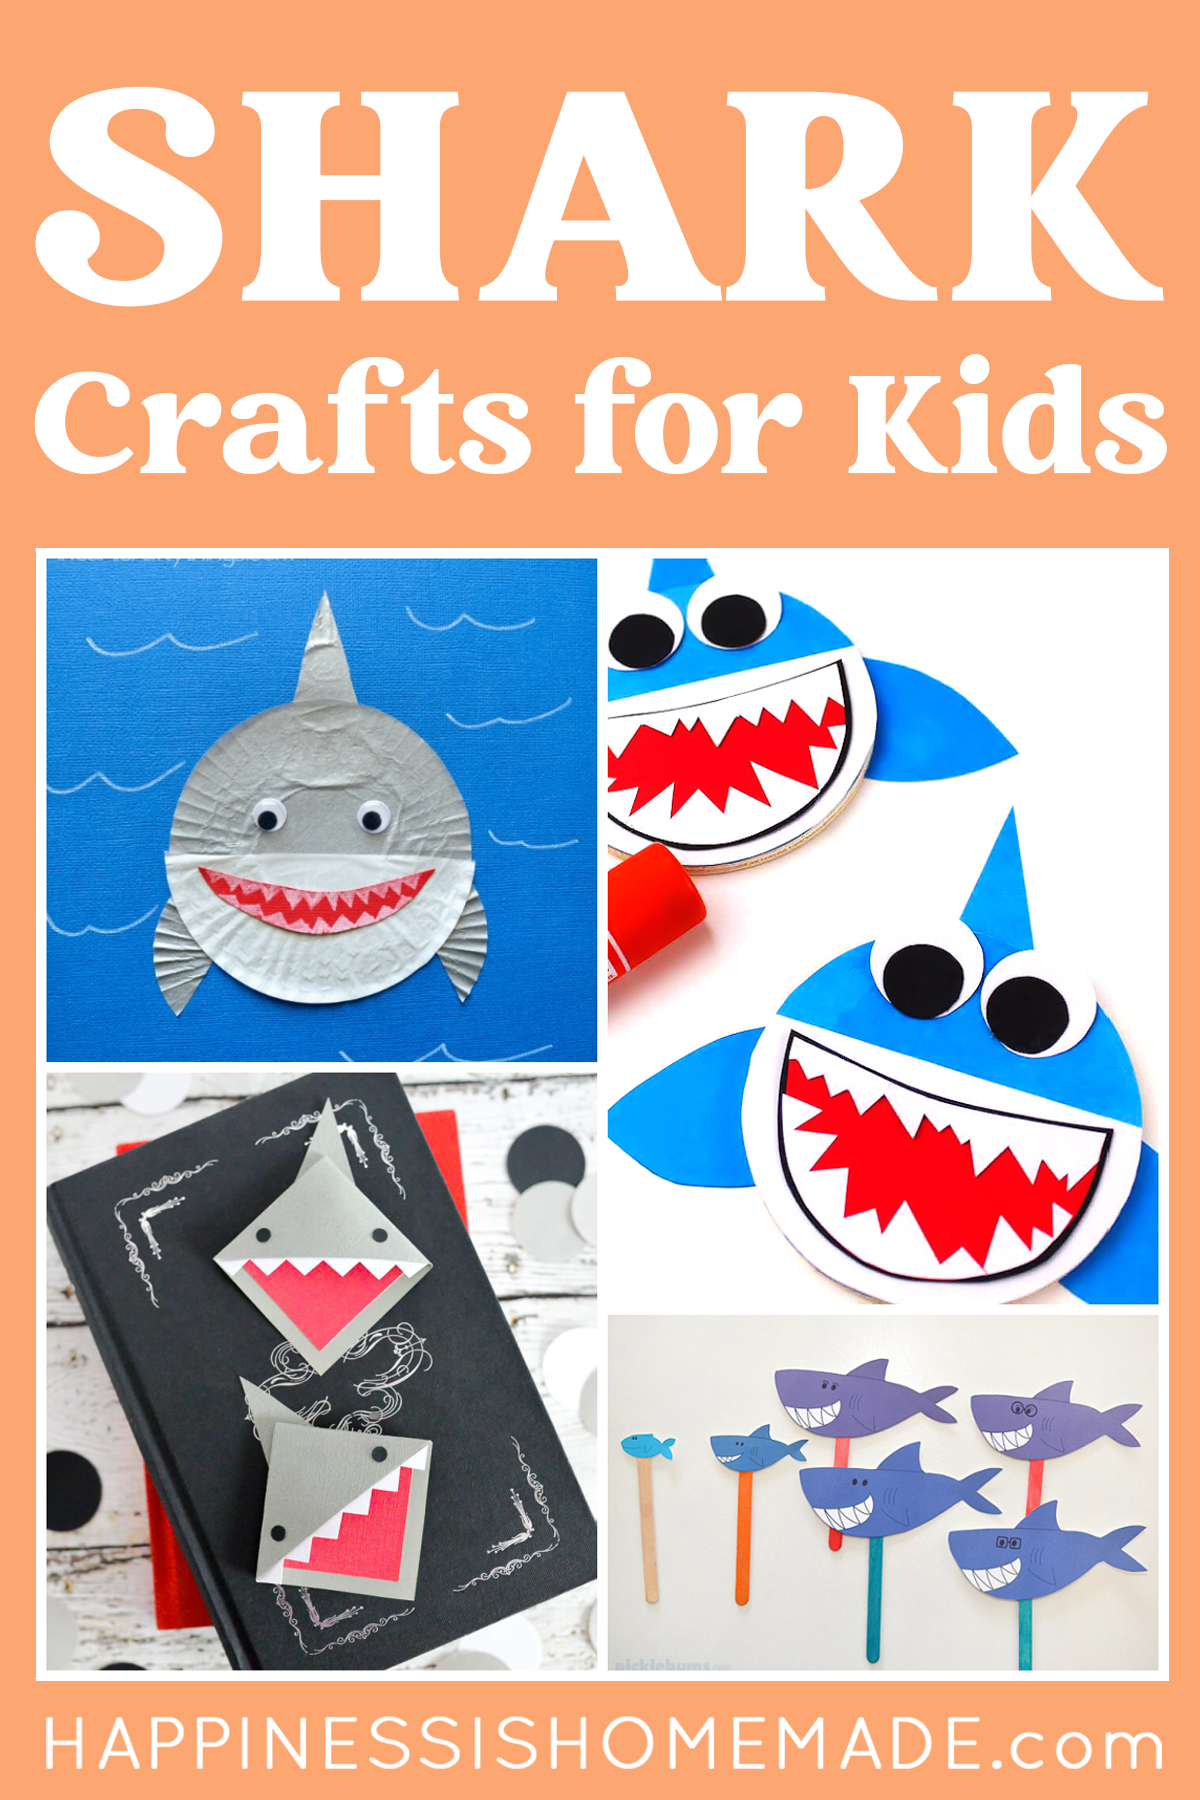 20+ Owl Crafts for Kids of All Ages - Happiness is Homemade